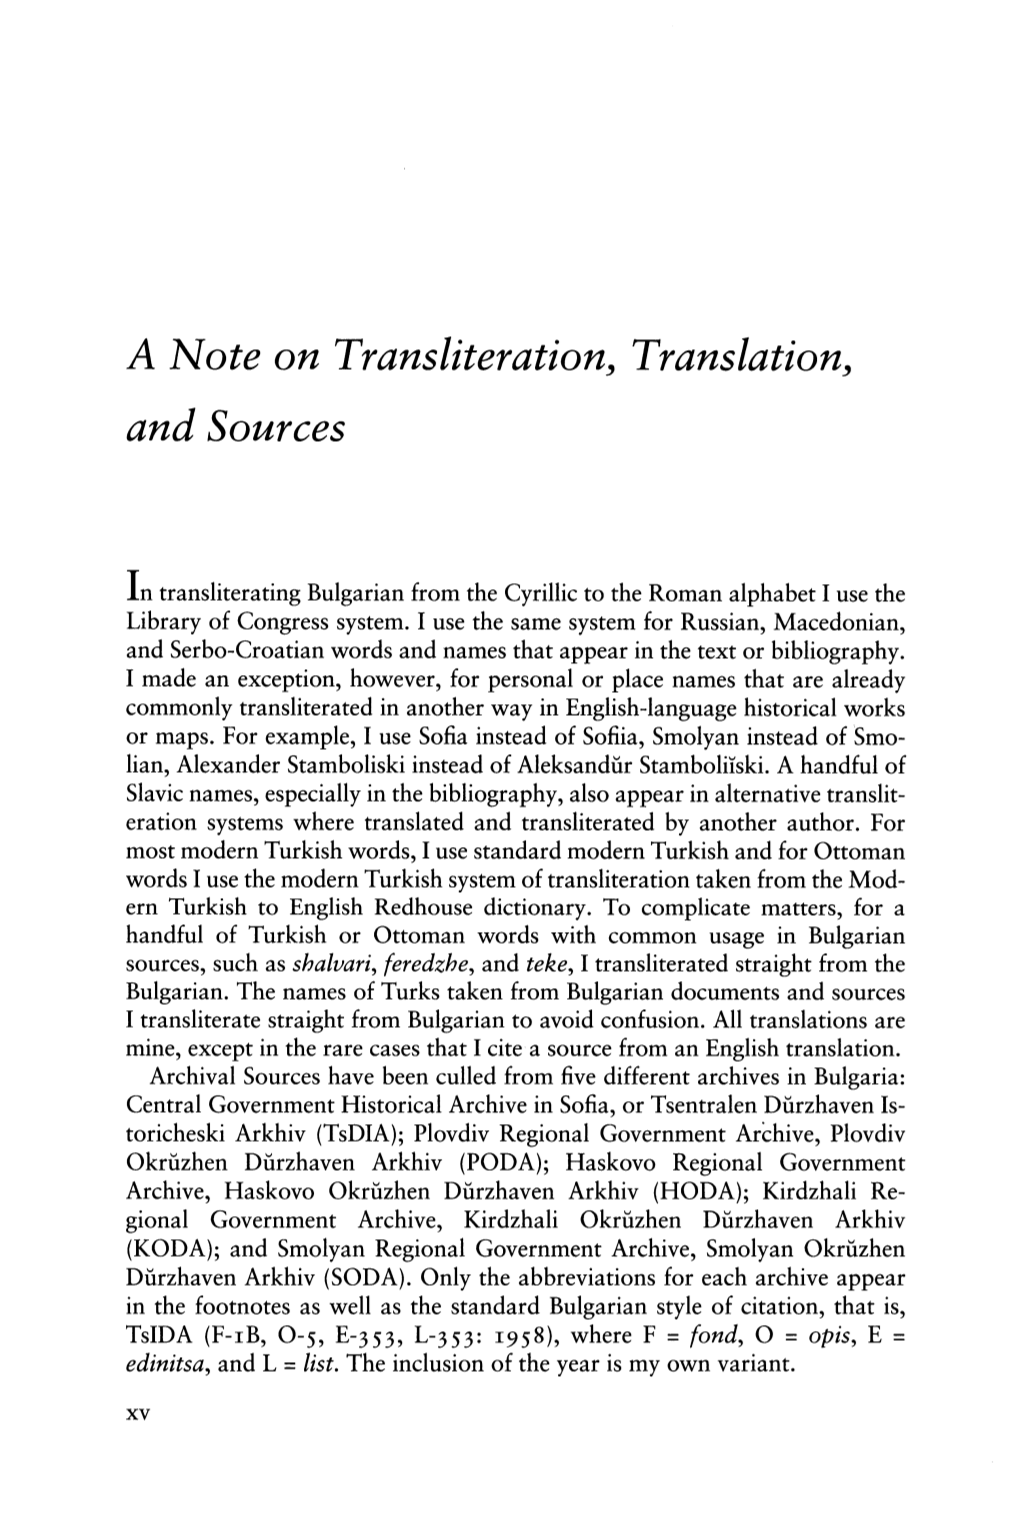 A Note on Transliteration, Translation, and Sources